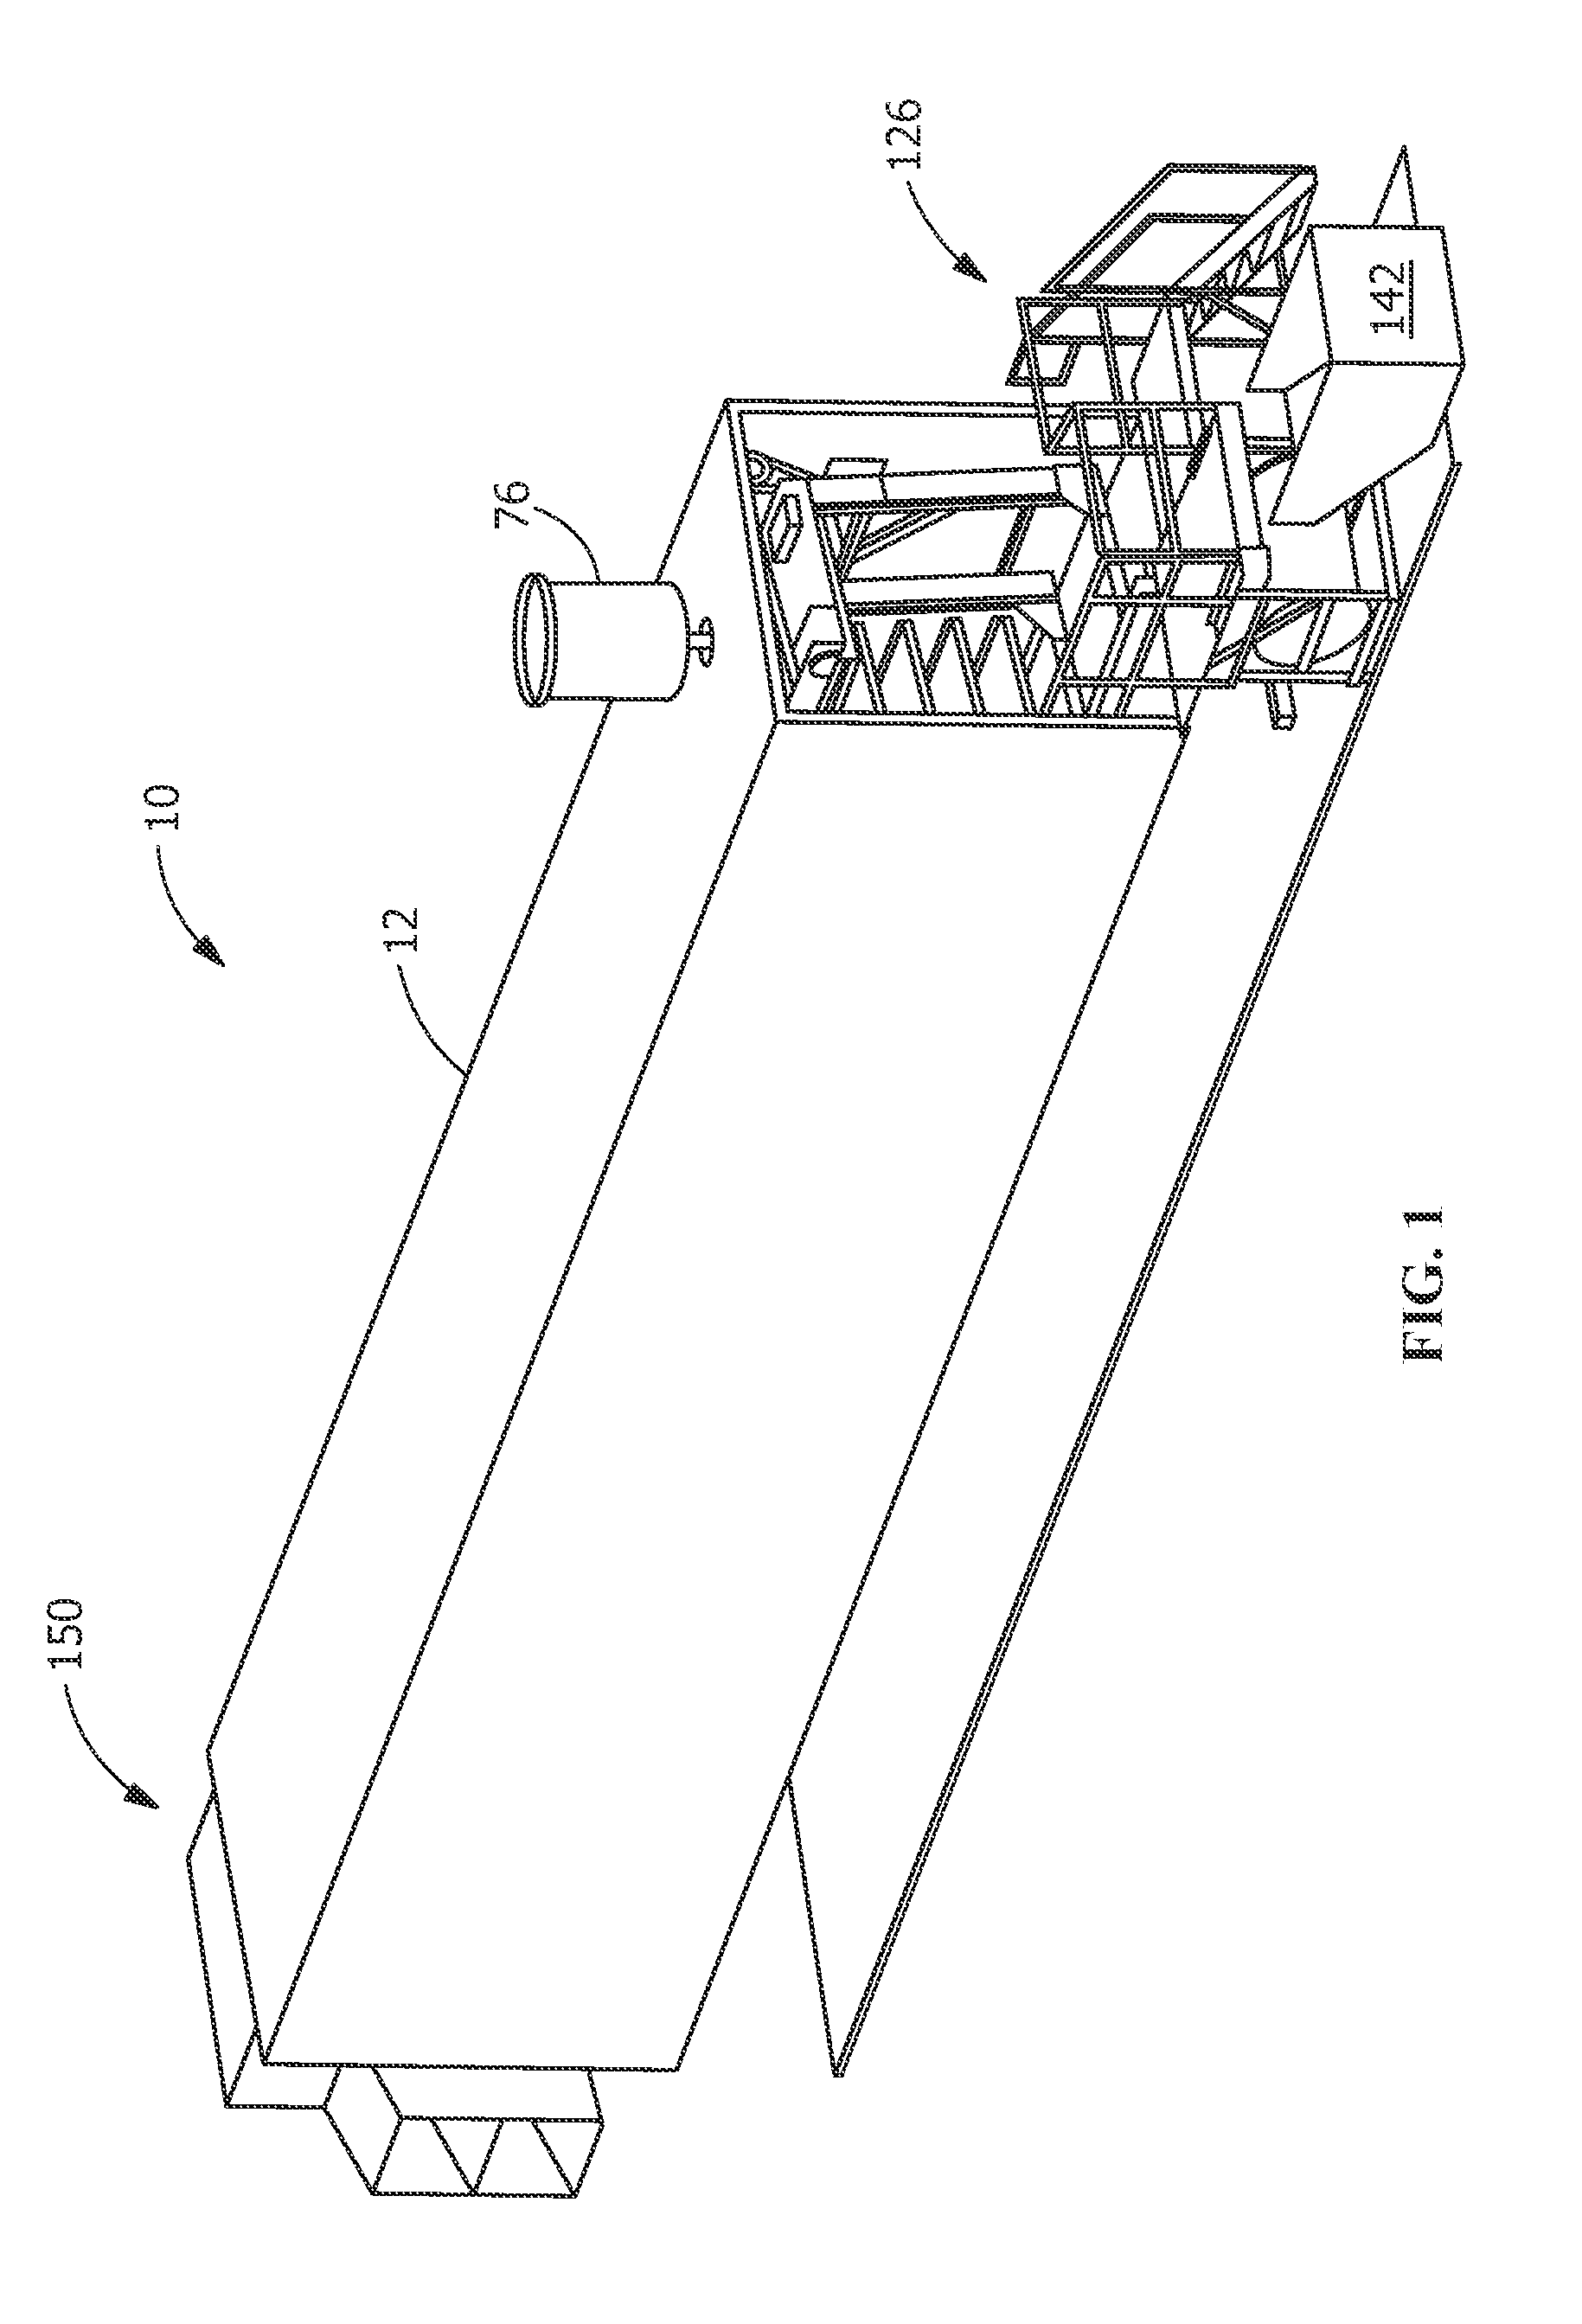 Sprouted seed grain growing and harvesting apparatus